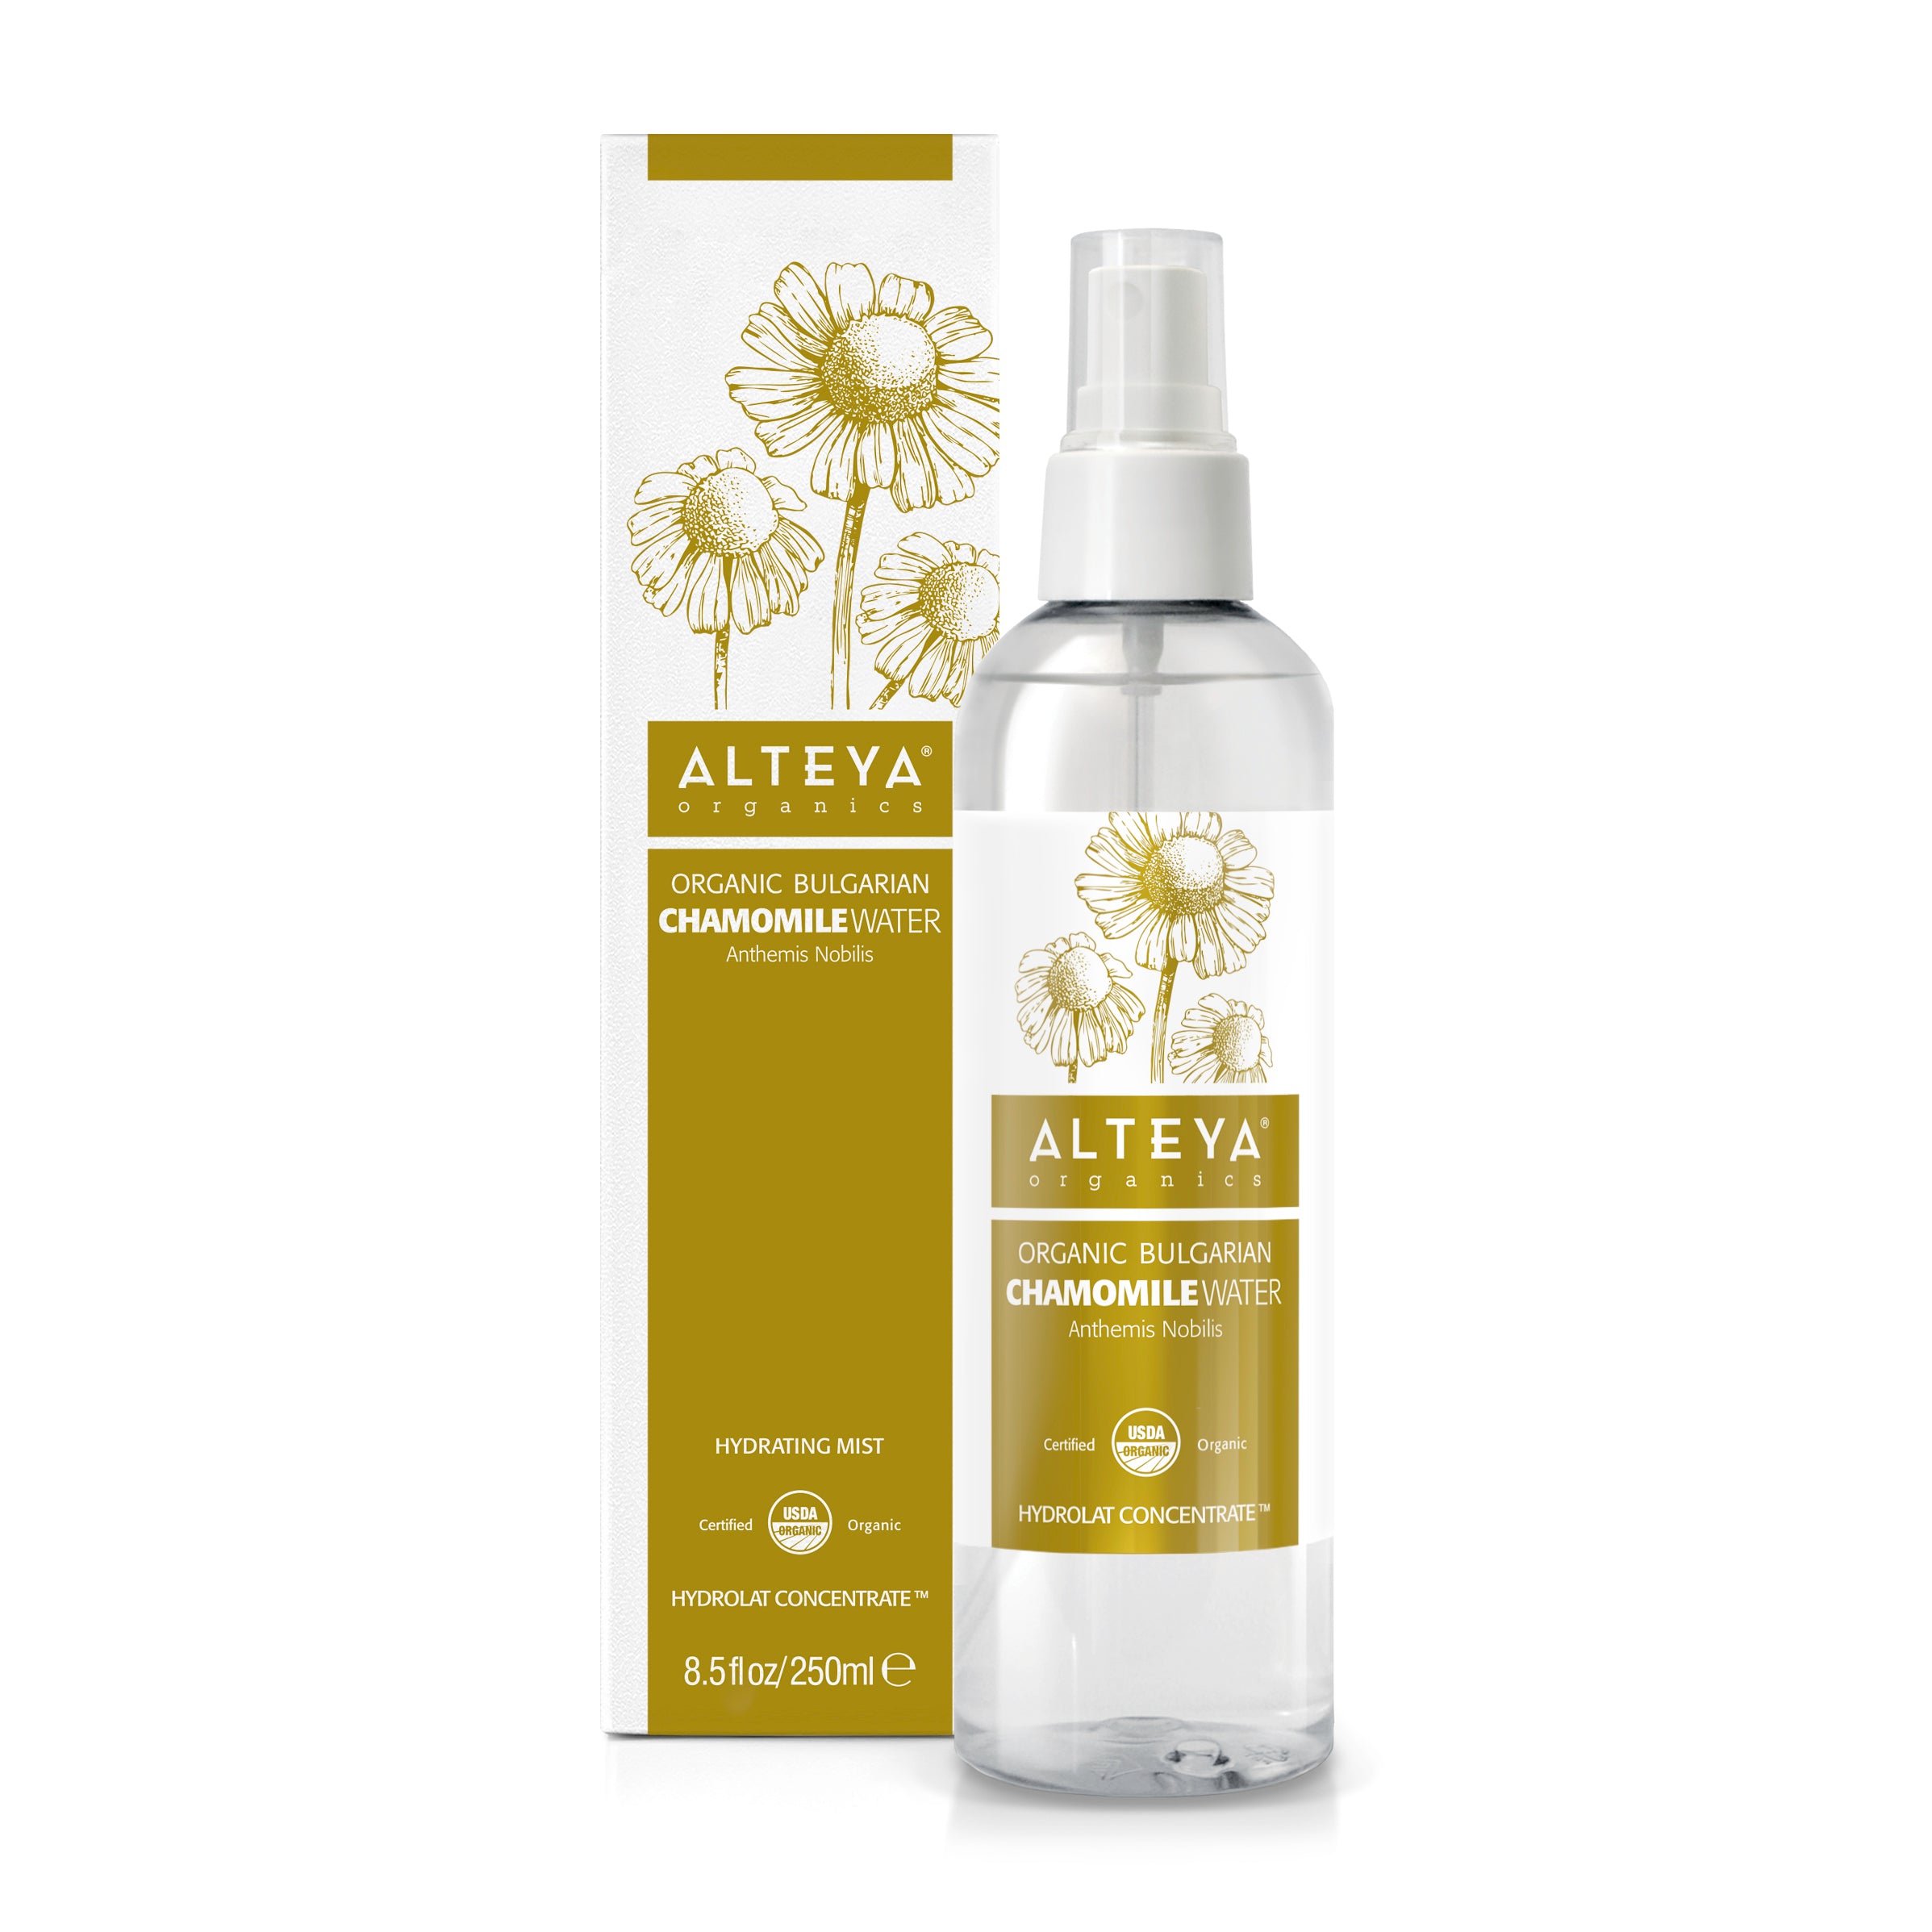 Experience the refreshing Aveta hydrating mist in a generous 200 ml size, enriched with Bulgarian Organic Chamomile Water for ultimate skin rejuvenation. This USDA organic mist will leave your skin feeling hydrated and